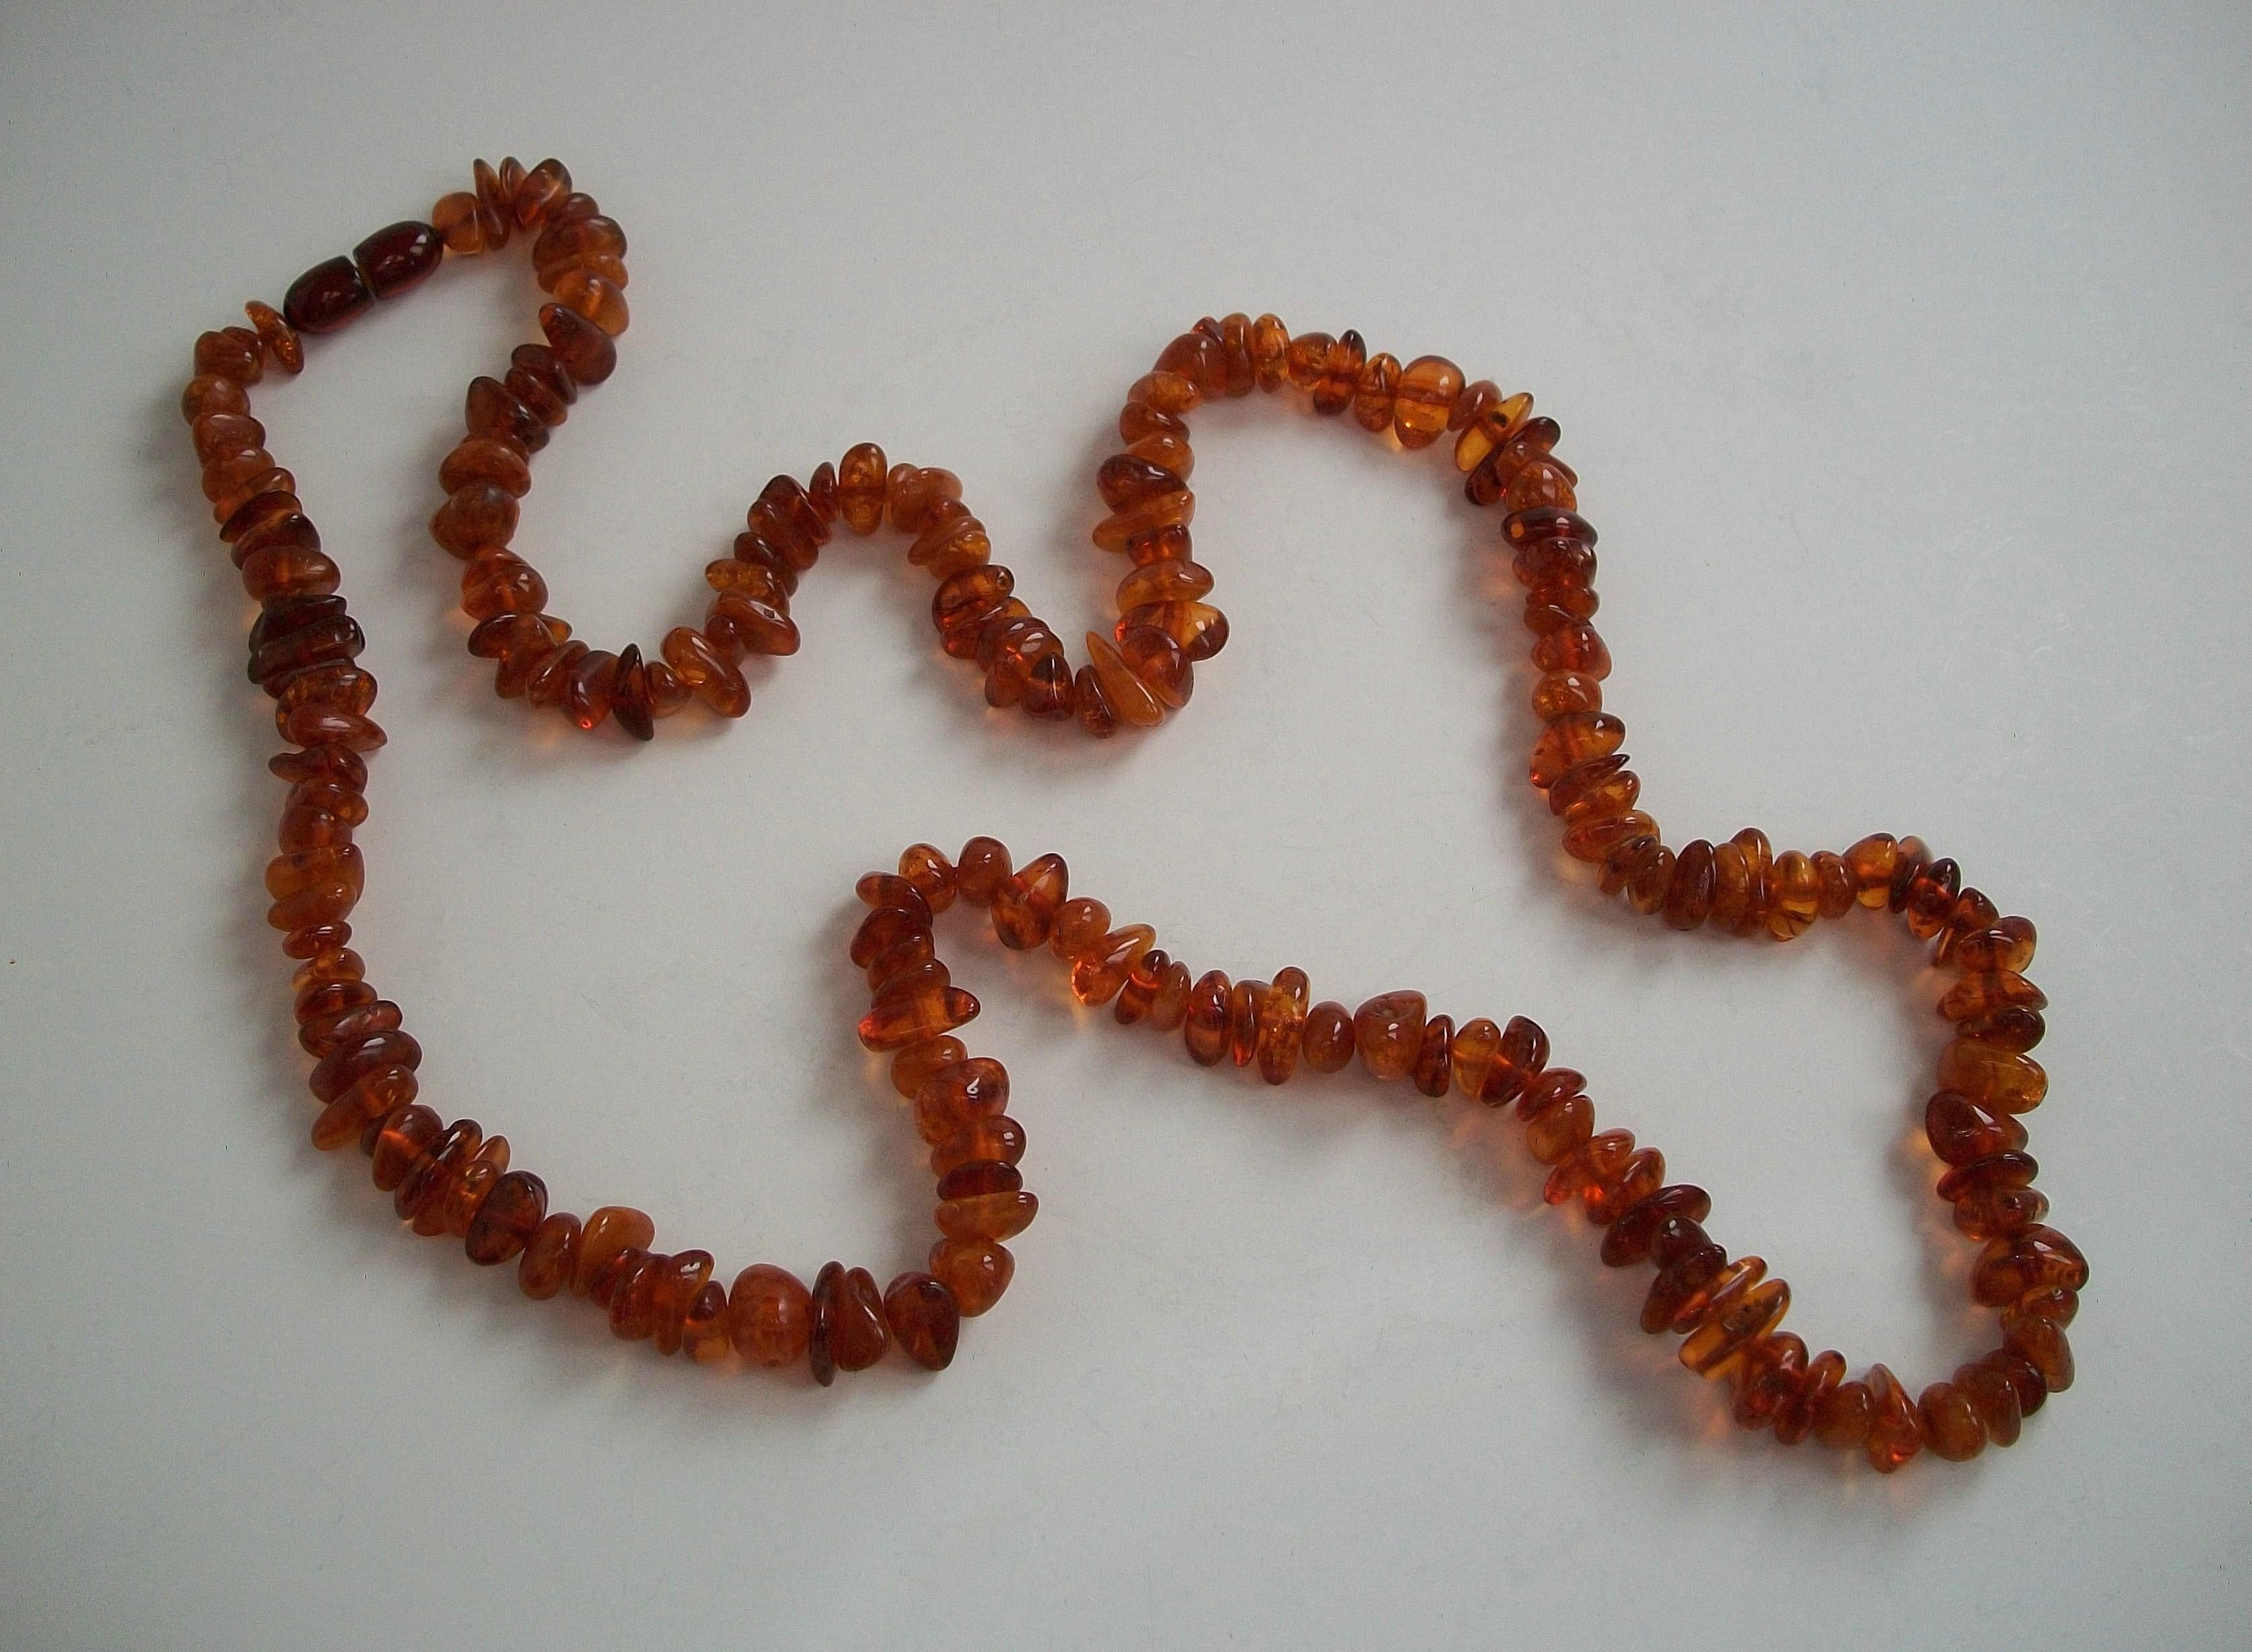 Vintage Baltic amber long necklace - featuring polished beads (some with inclusions) - can be doubled up to wear as a choker - original barrel clasp - circa 1930's.

Excellent vintage condition - all original - no loss - no damage - no repairs -